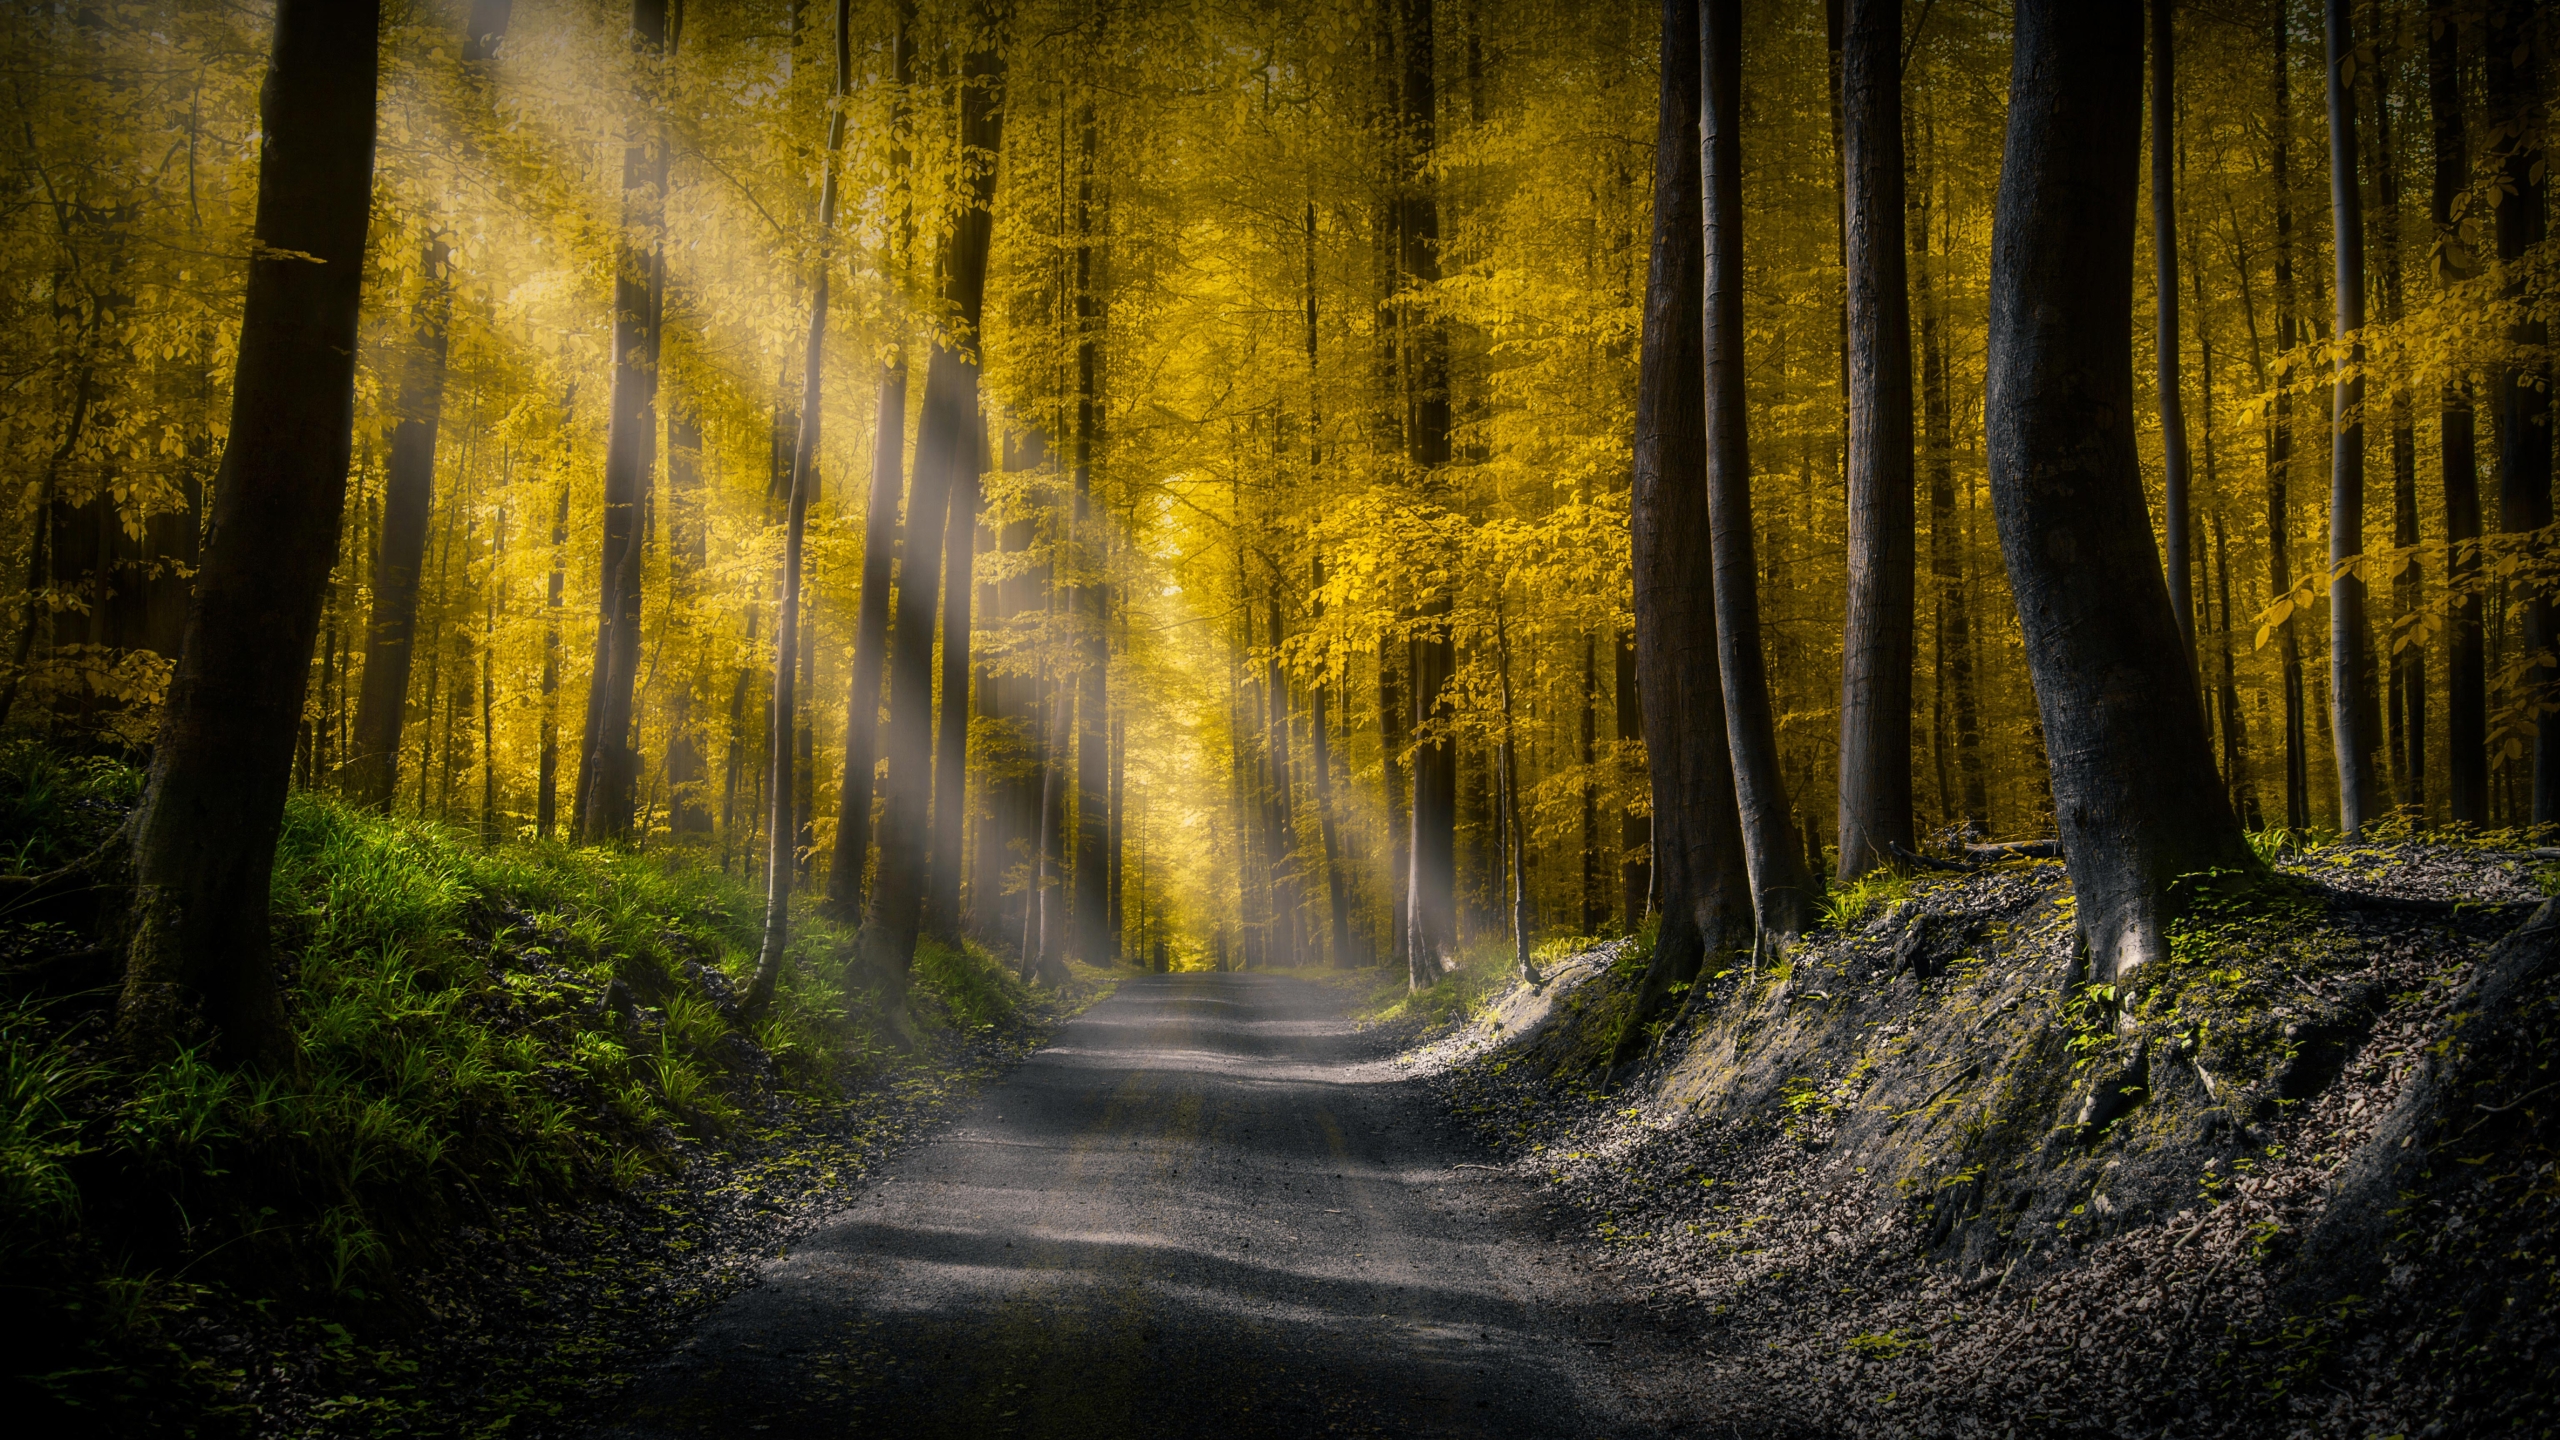 2560x1440 Forests Roads Rays Of Light 1440p Resolution Wallpaper Hd